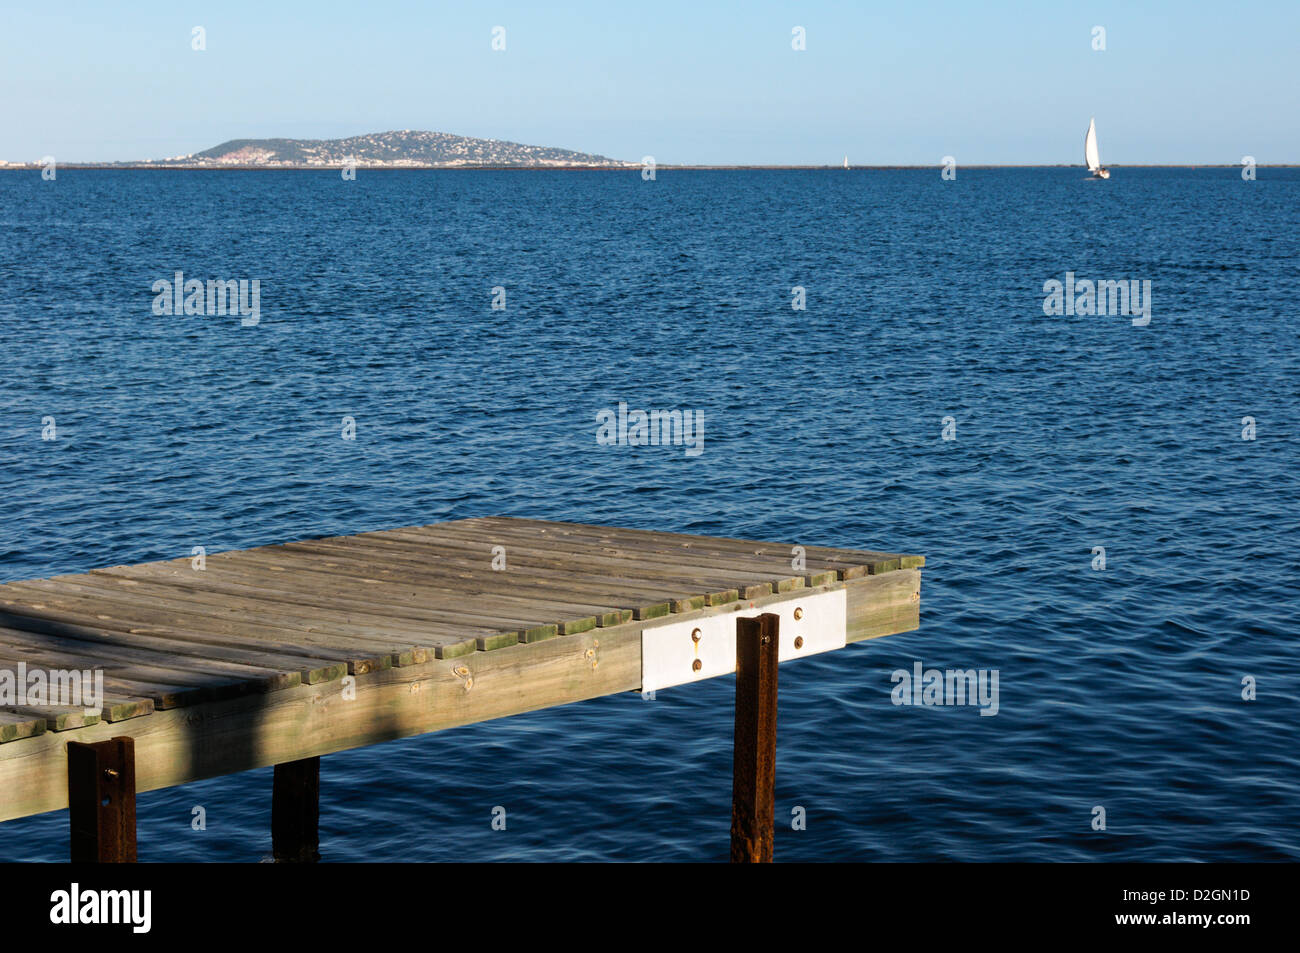 A small wooden jetty on the Étang de Thau in Languedoc in the south of France. Stock Photo